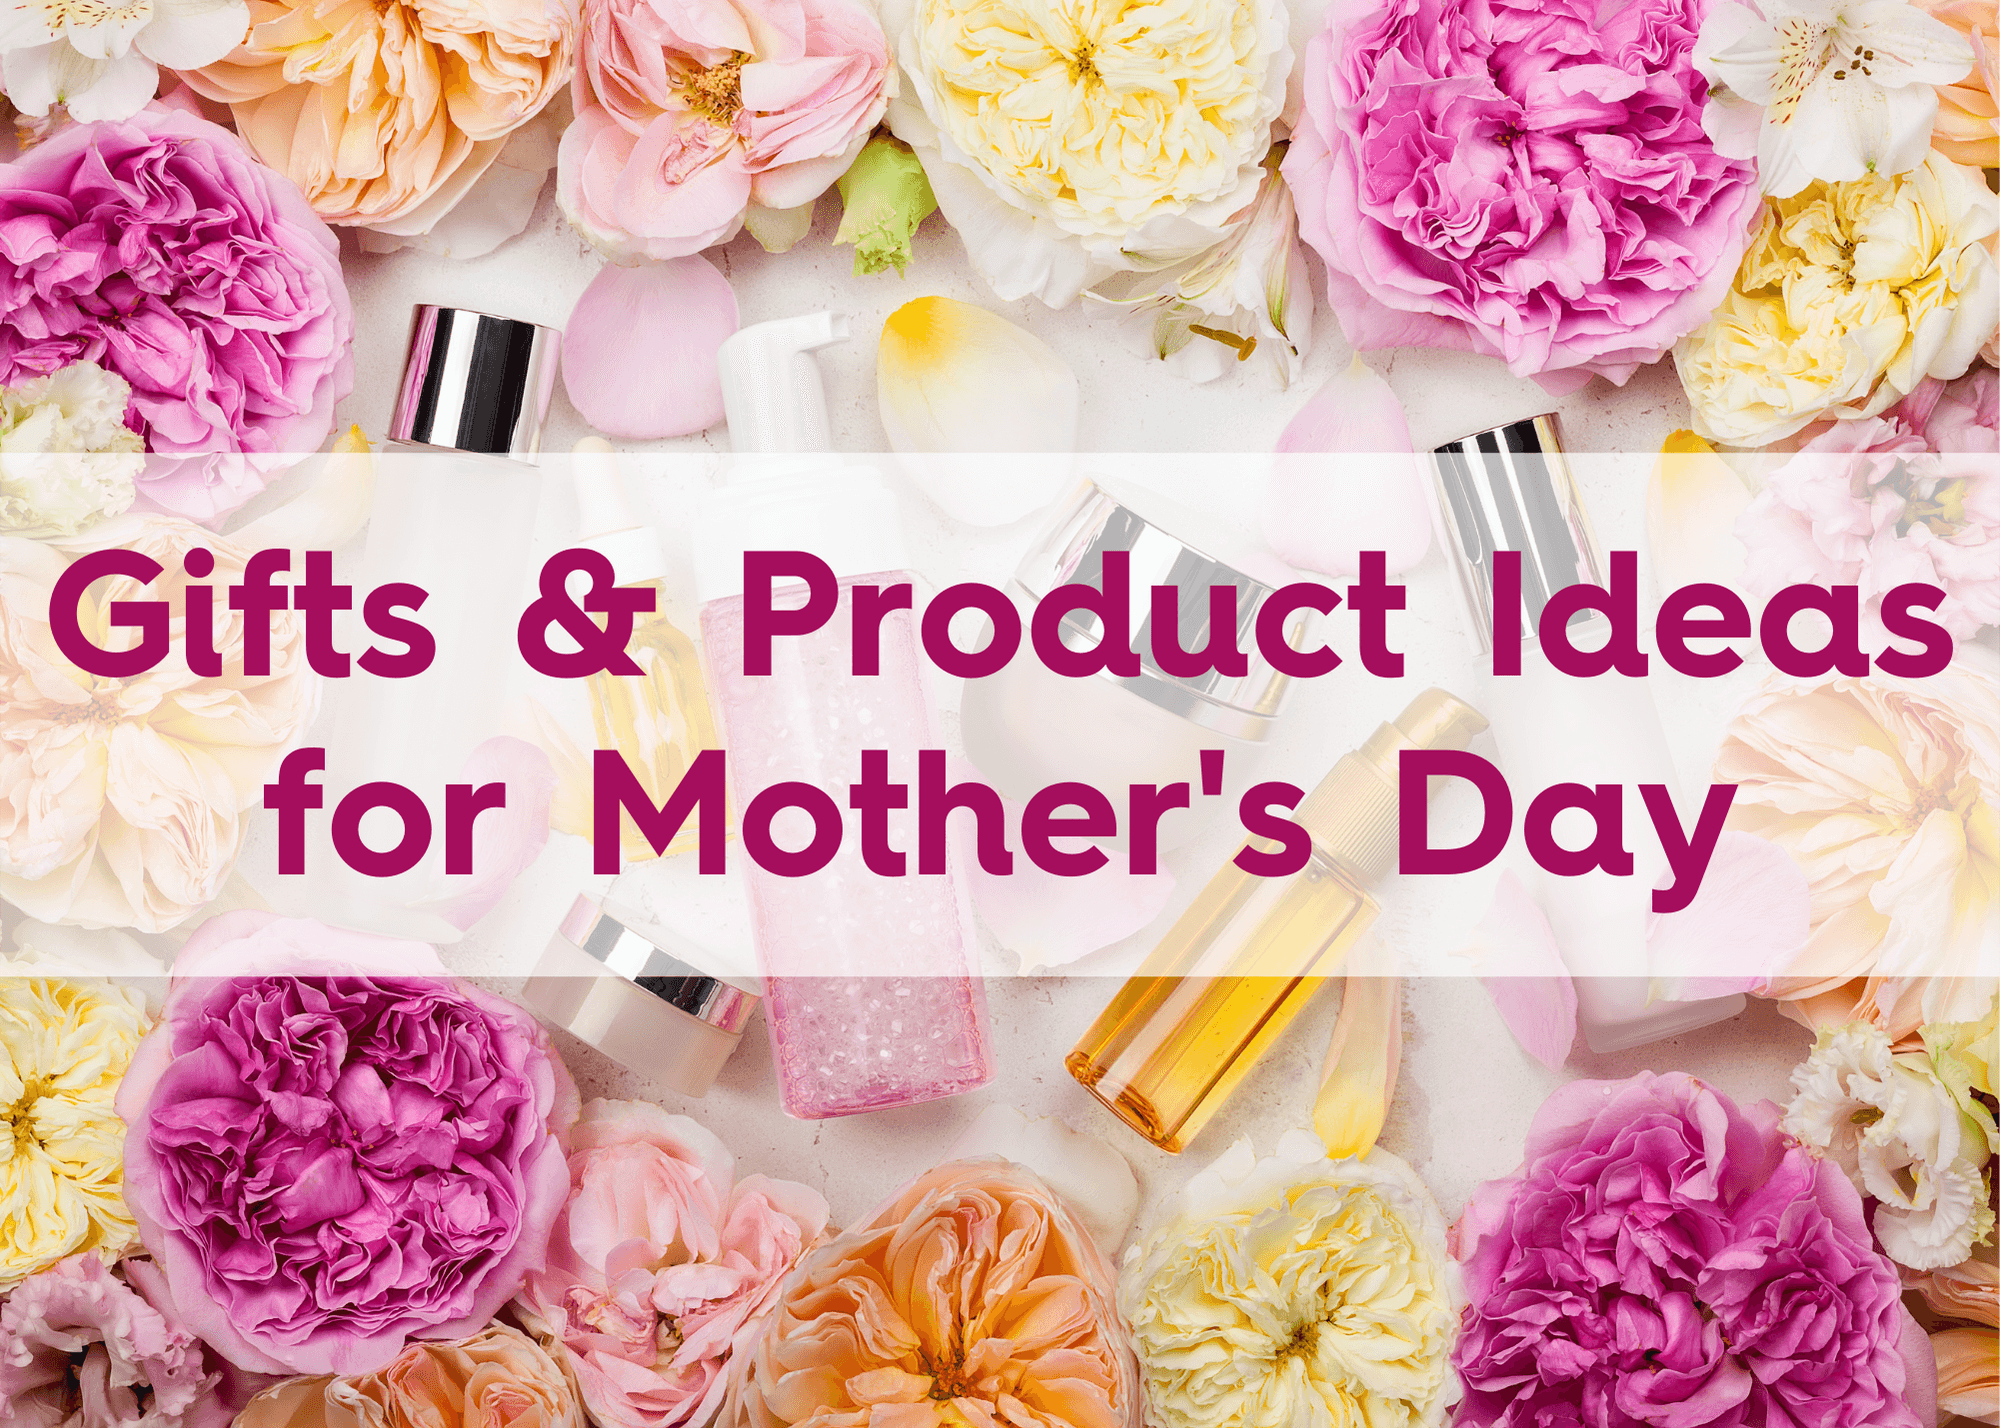 gift ideas for mother's day and what to stock for spring in your skin care business, text over image of skin care products and flowers